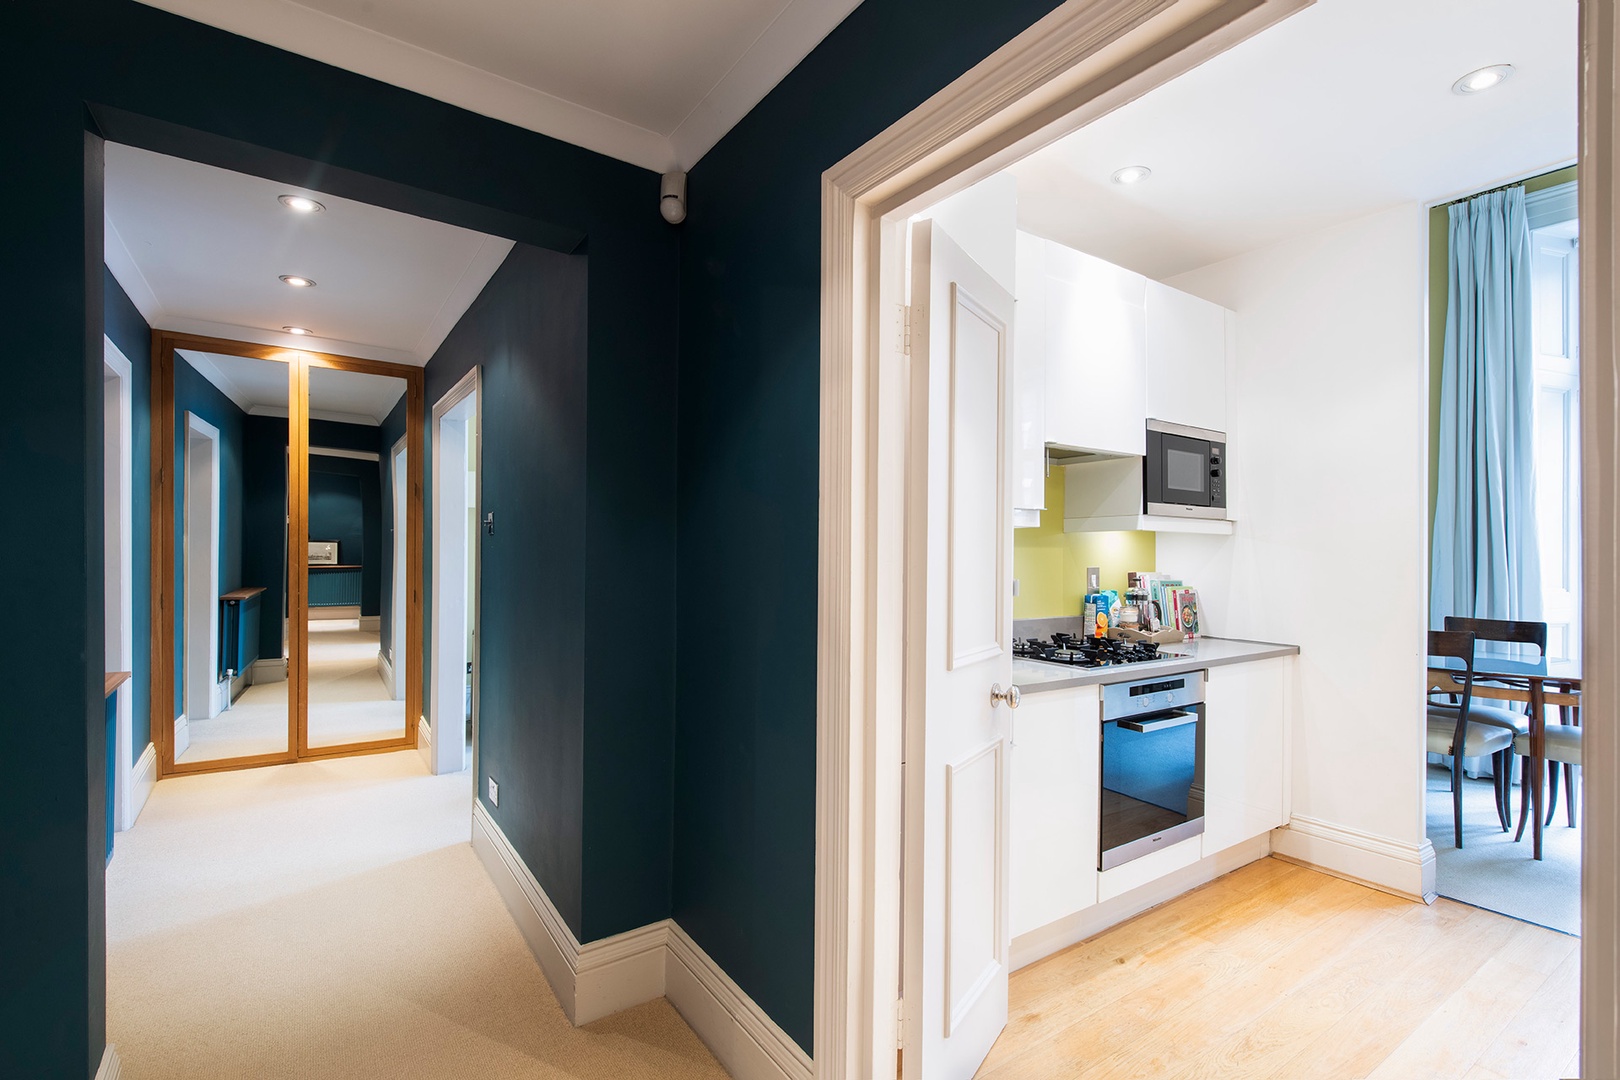 Hallway with stunning deep blue walls leads to bedrooms